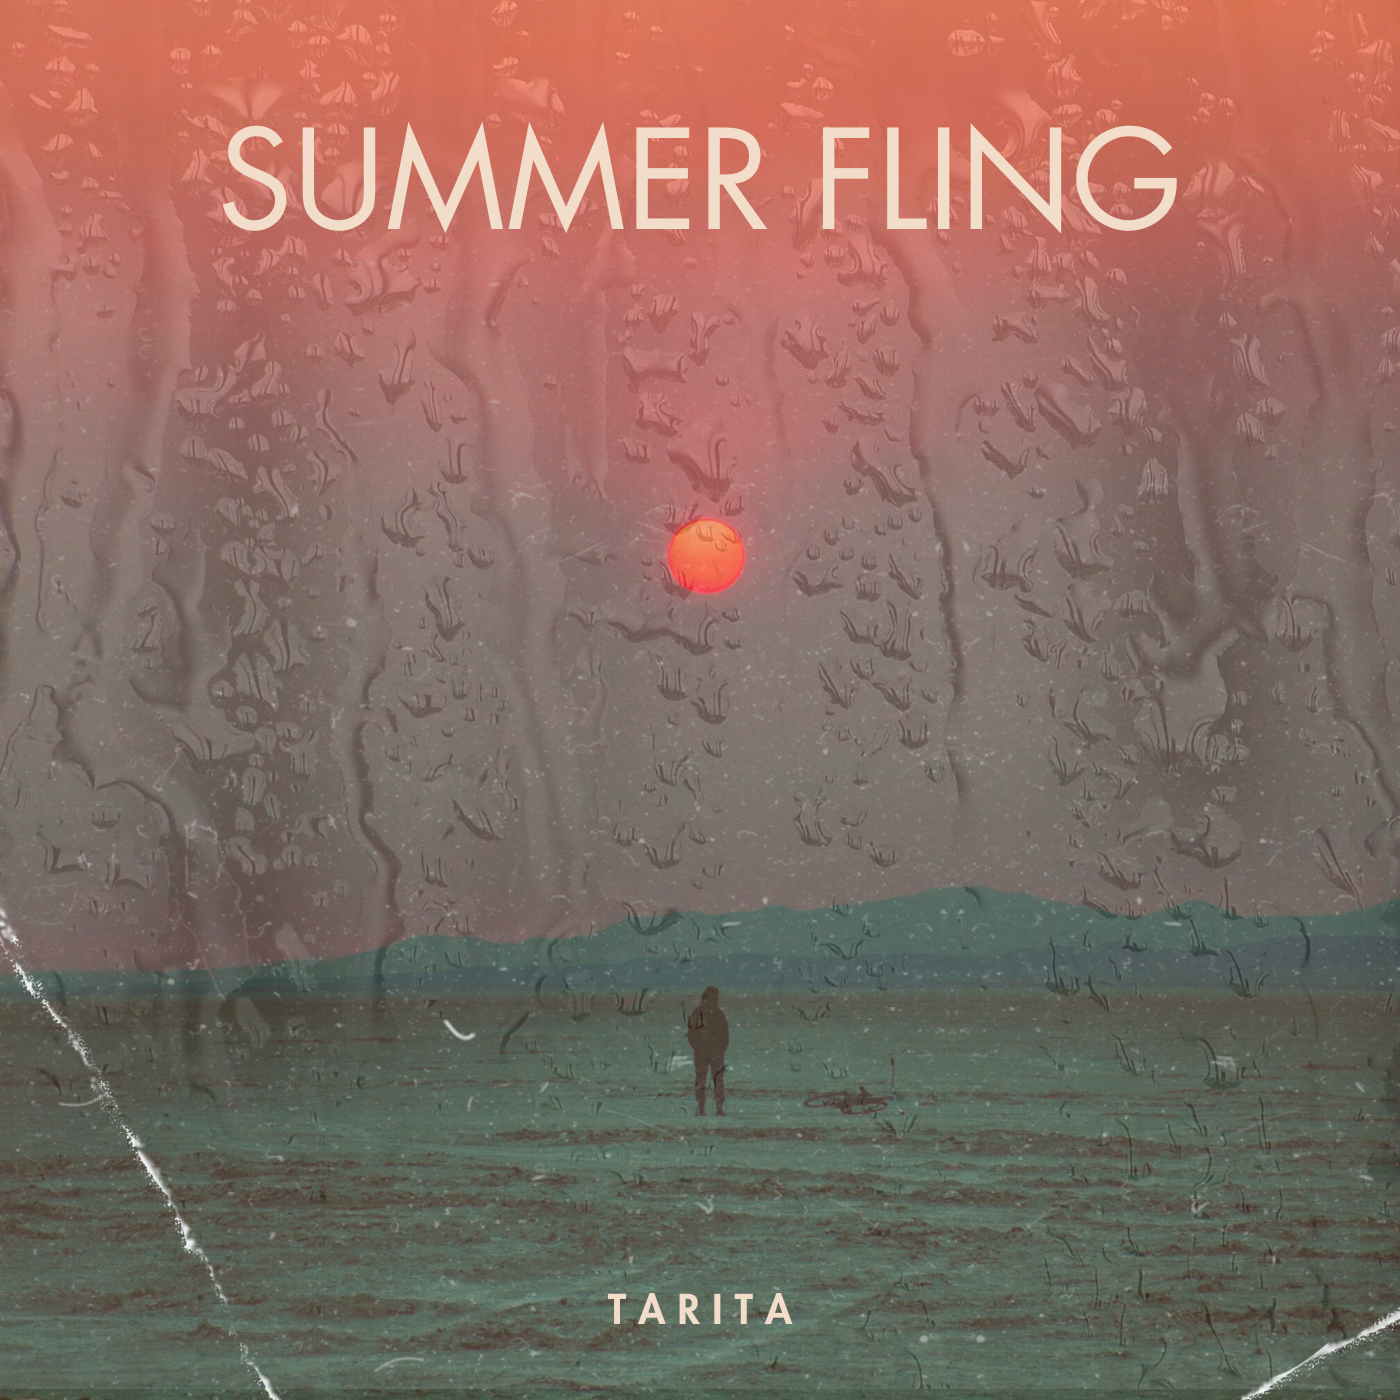 Tarita adds new life to his single ‘Summer Fling’, a release eighteen years in the making